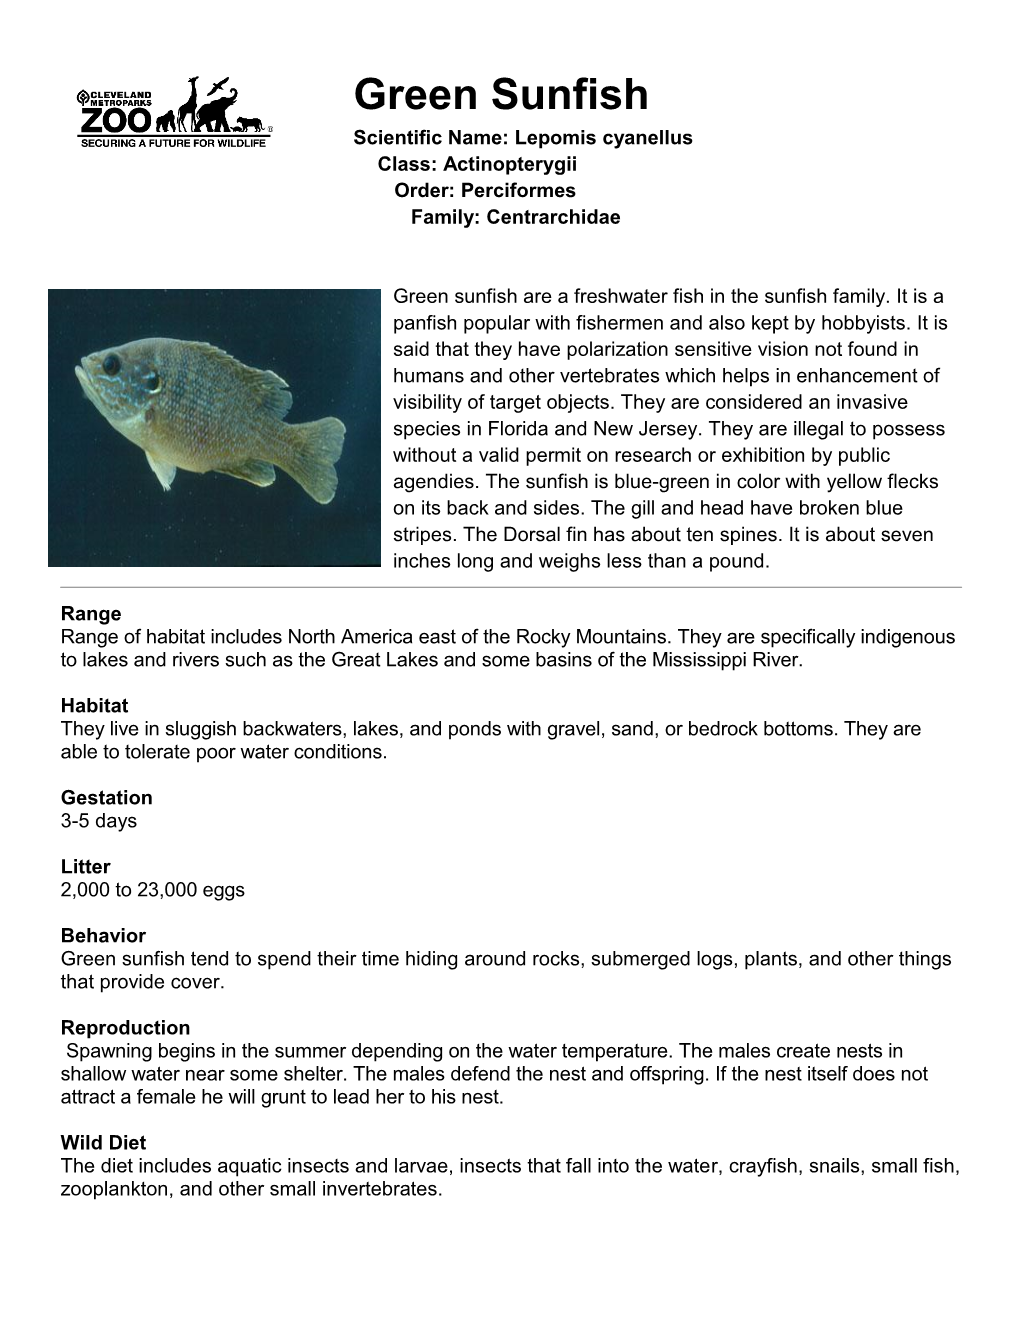 Green Sunfish Scientific Name: Lepomis Cyanellus Class: Actinopterygii Order: Perciformes Family: Centrarchidae